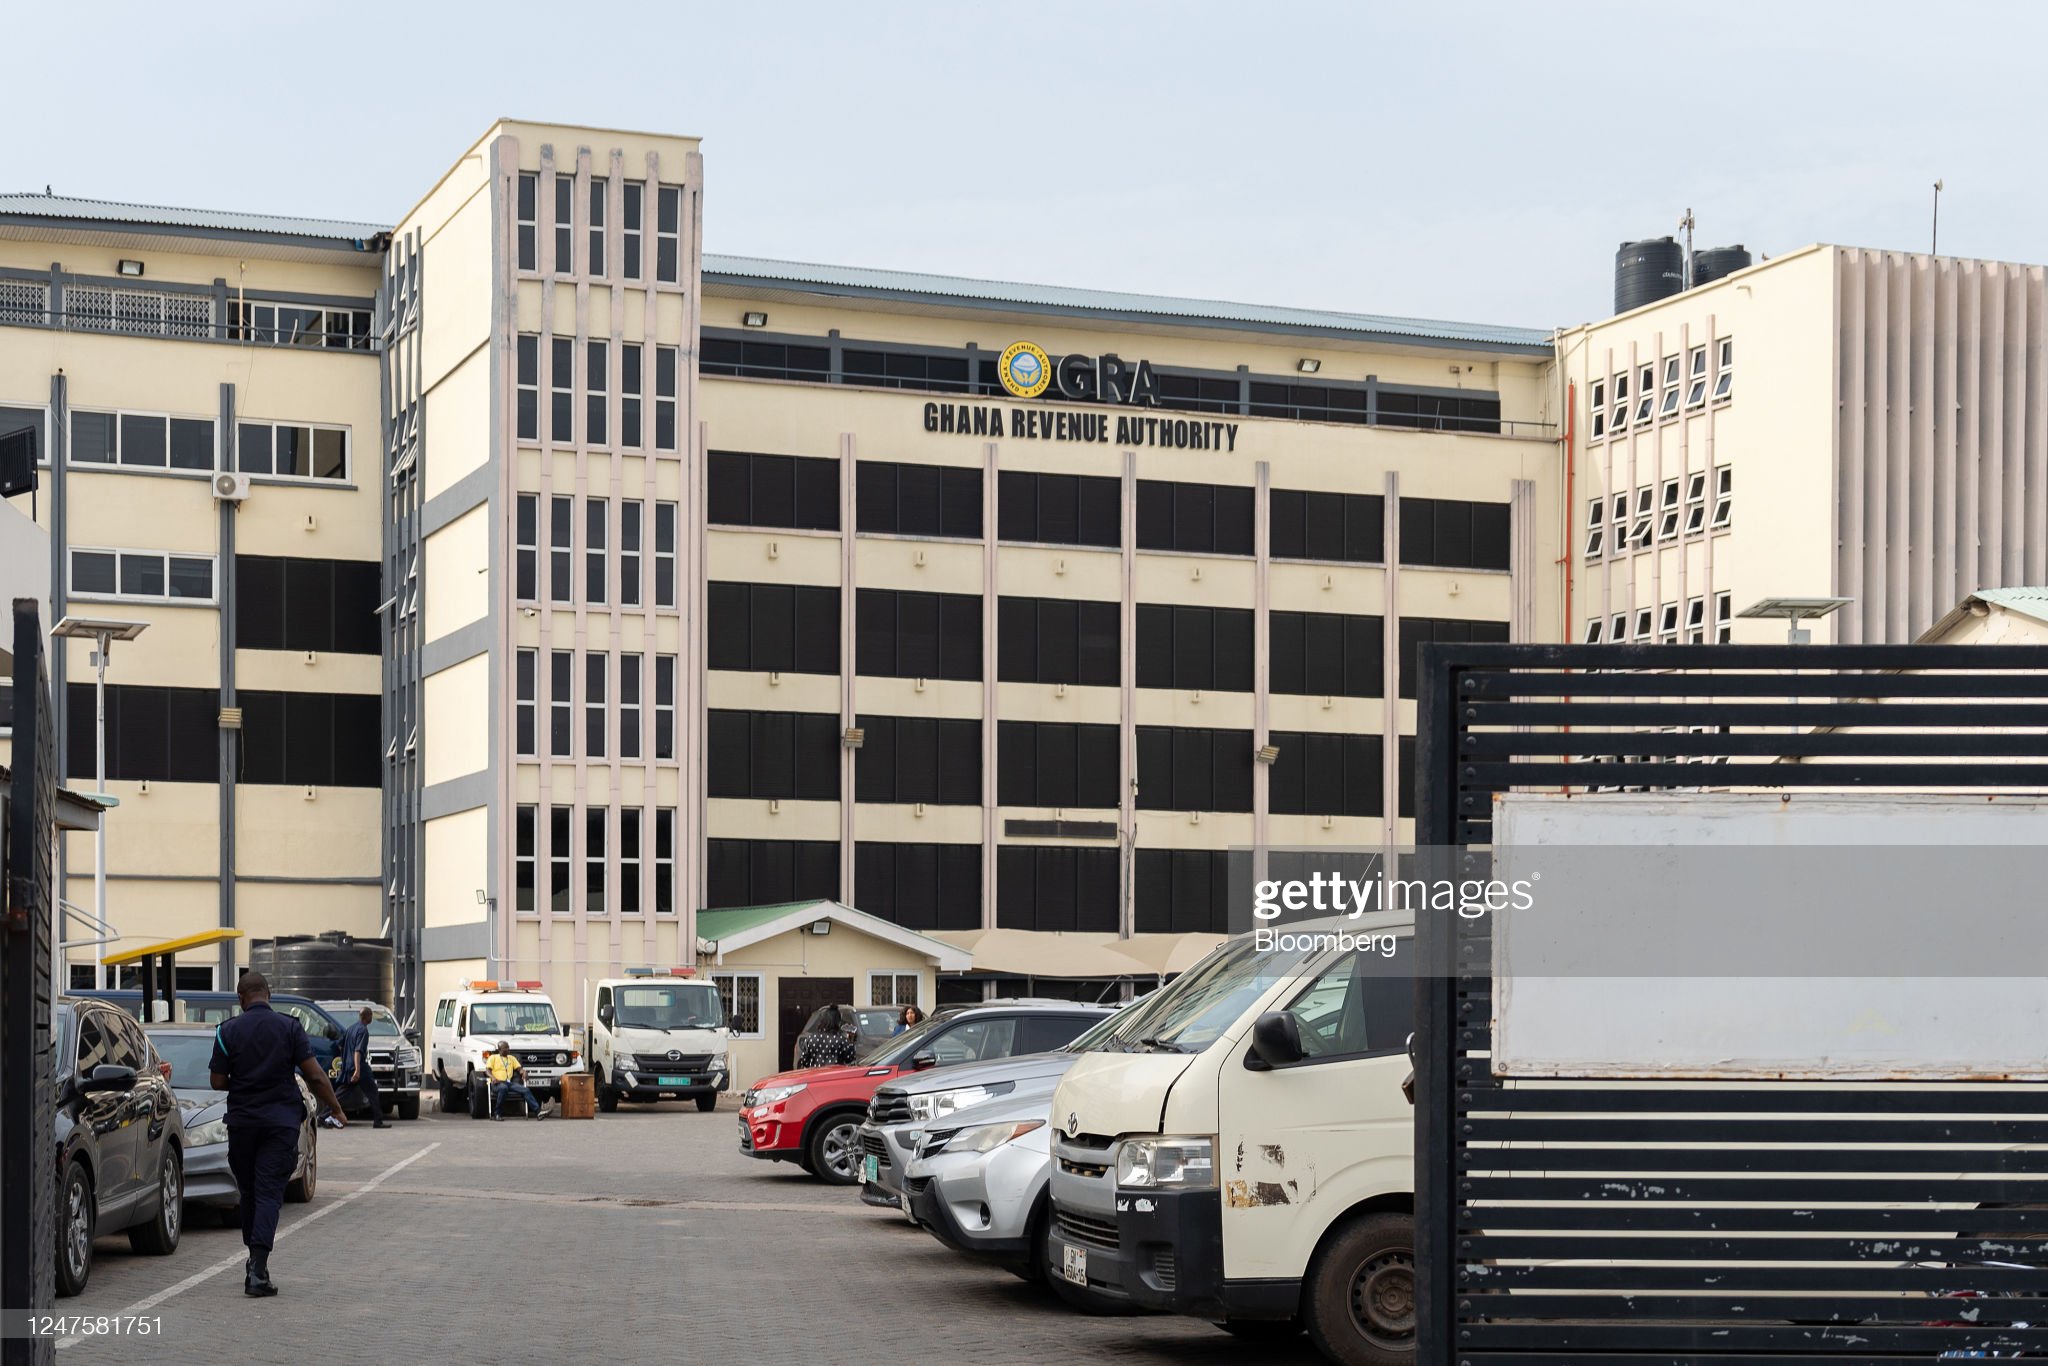 The Ghana Revenue Authority (GRA) headquarters in Accra, Ghana, on Tuesday, Feb. 28, 2023. Ghanas cedi, the worlds second-worst performing currency this year, is heading for more pain after the West African nation missed a self-imposed deadline to restructure its bilateral debt and move closer to tapping foreign aid. Photographer: Ernest Ankomah/Bloomberg via Getty Images